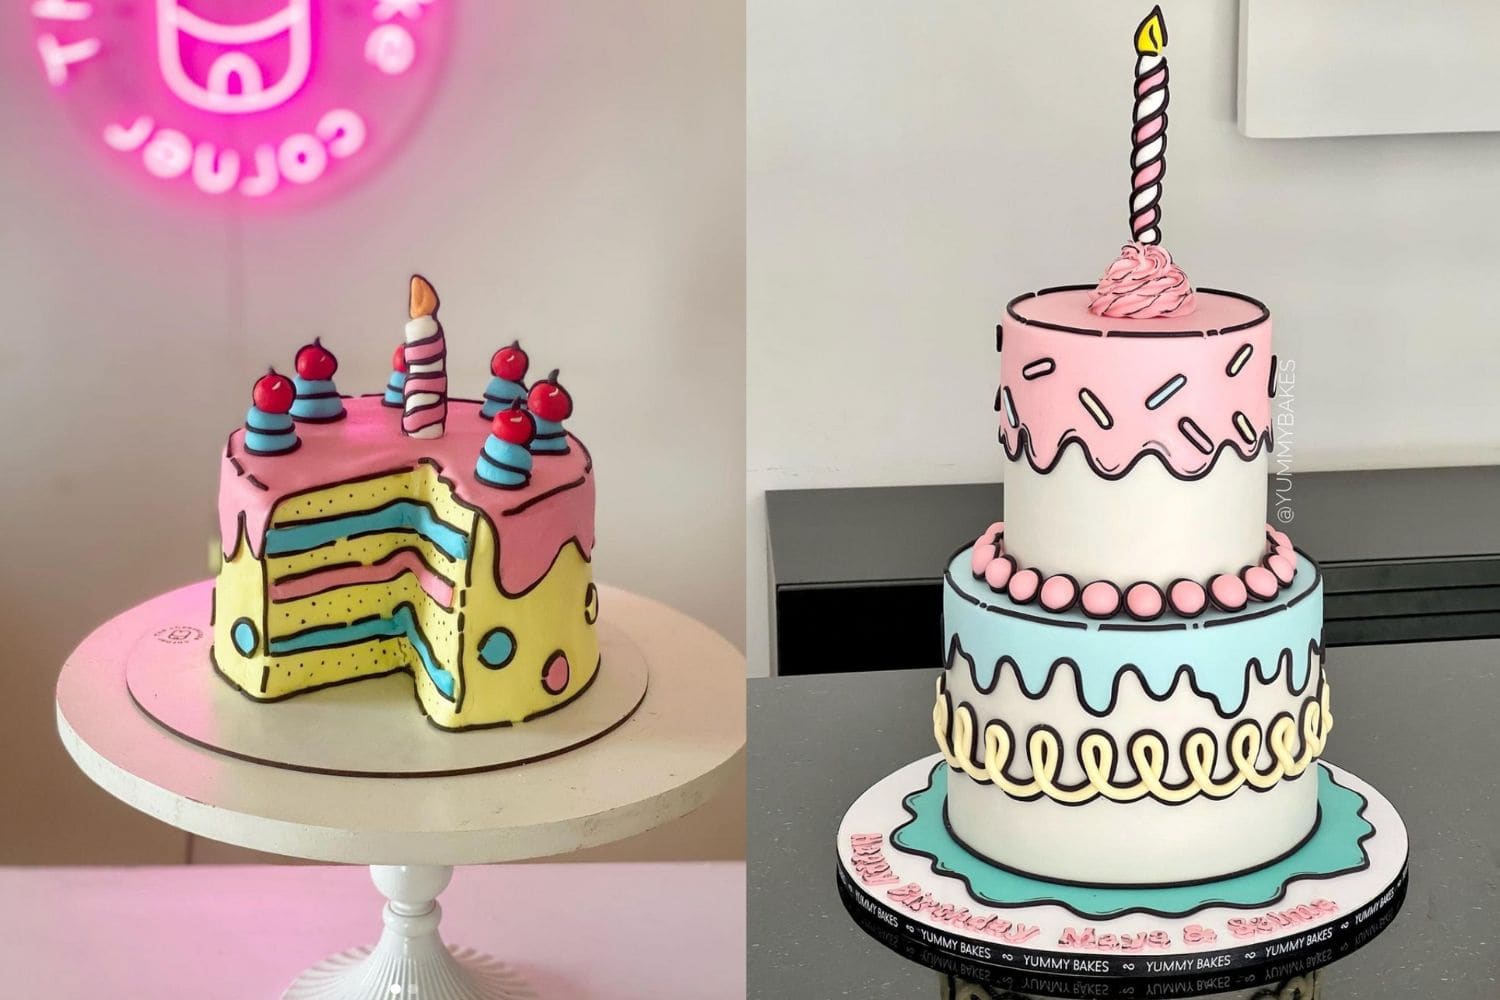 How To Make A Cartoon Cake, Plus 15 Cool Designs - Let's Eat Cake